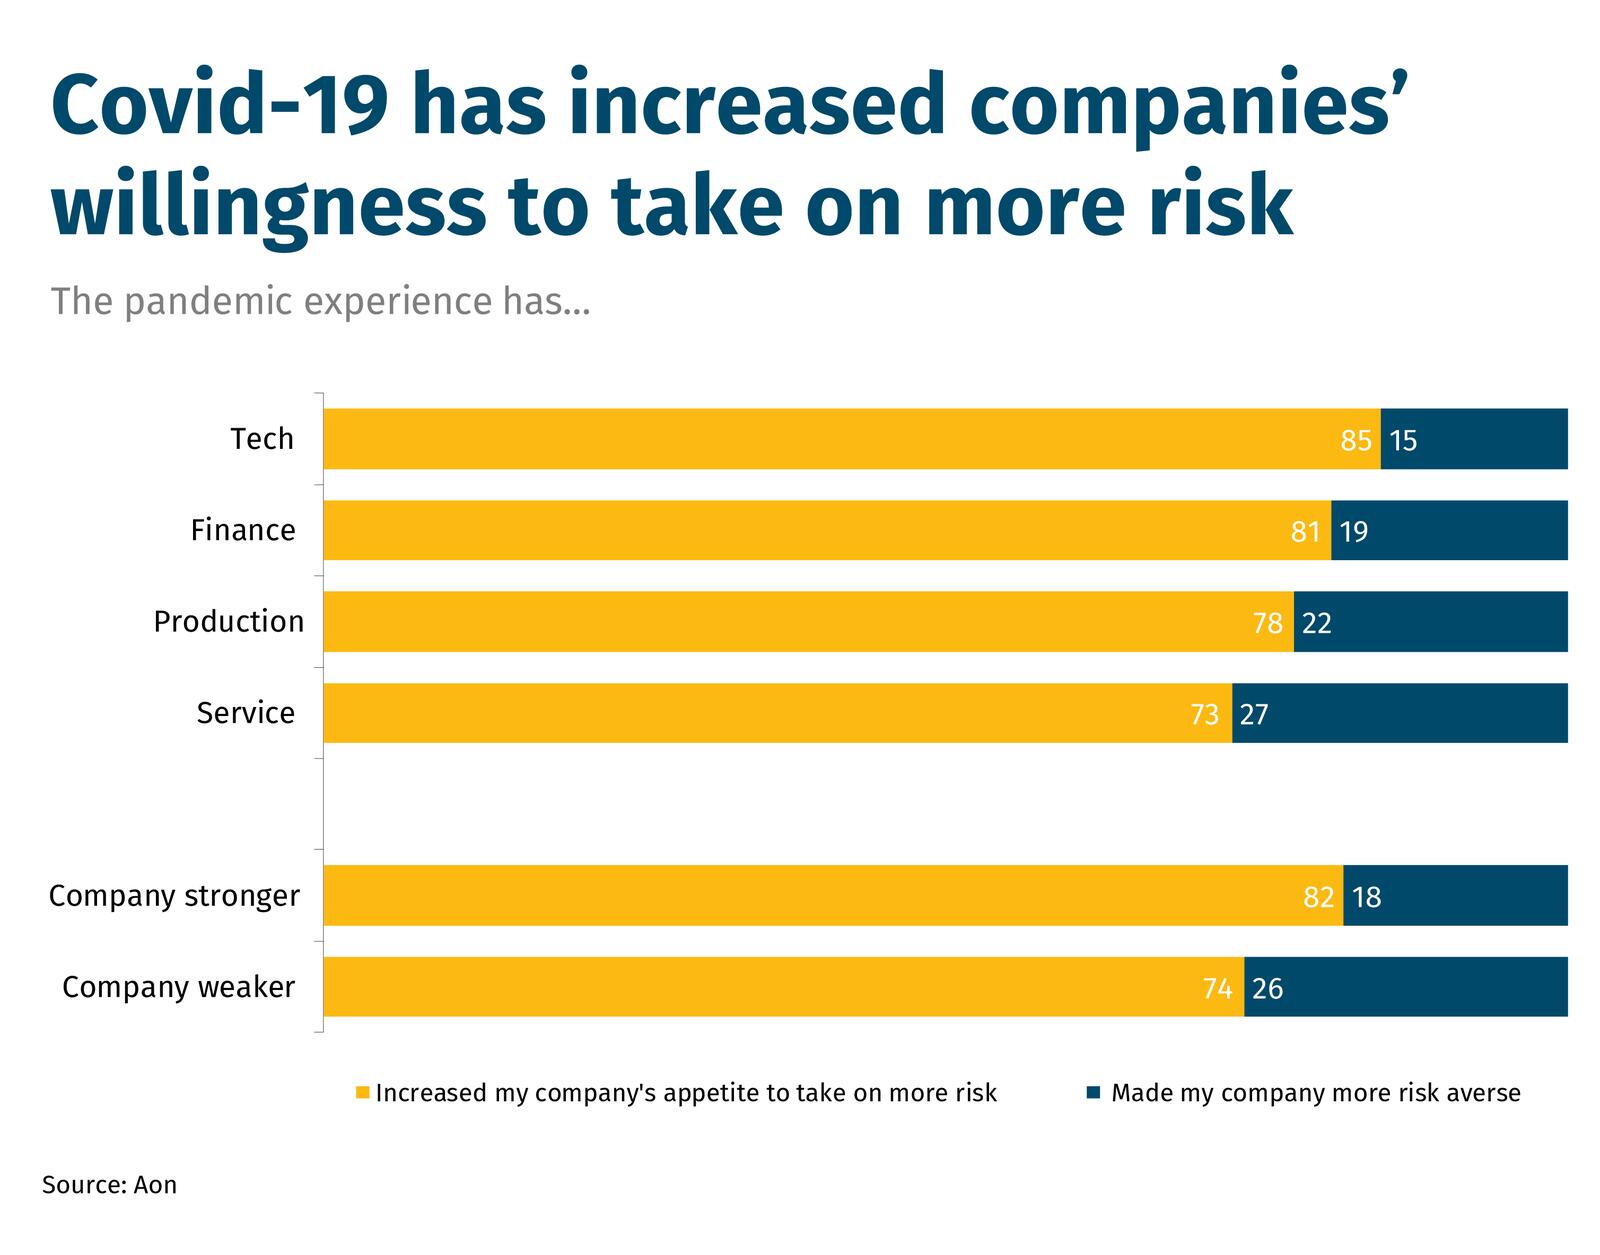 Covid-19 has increased companies’ willingness to take on more risk